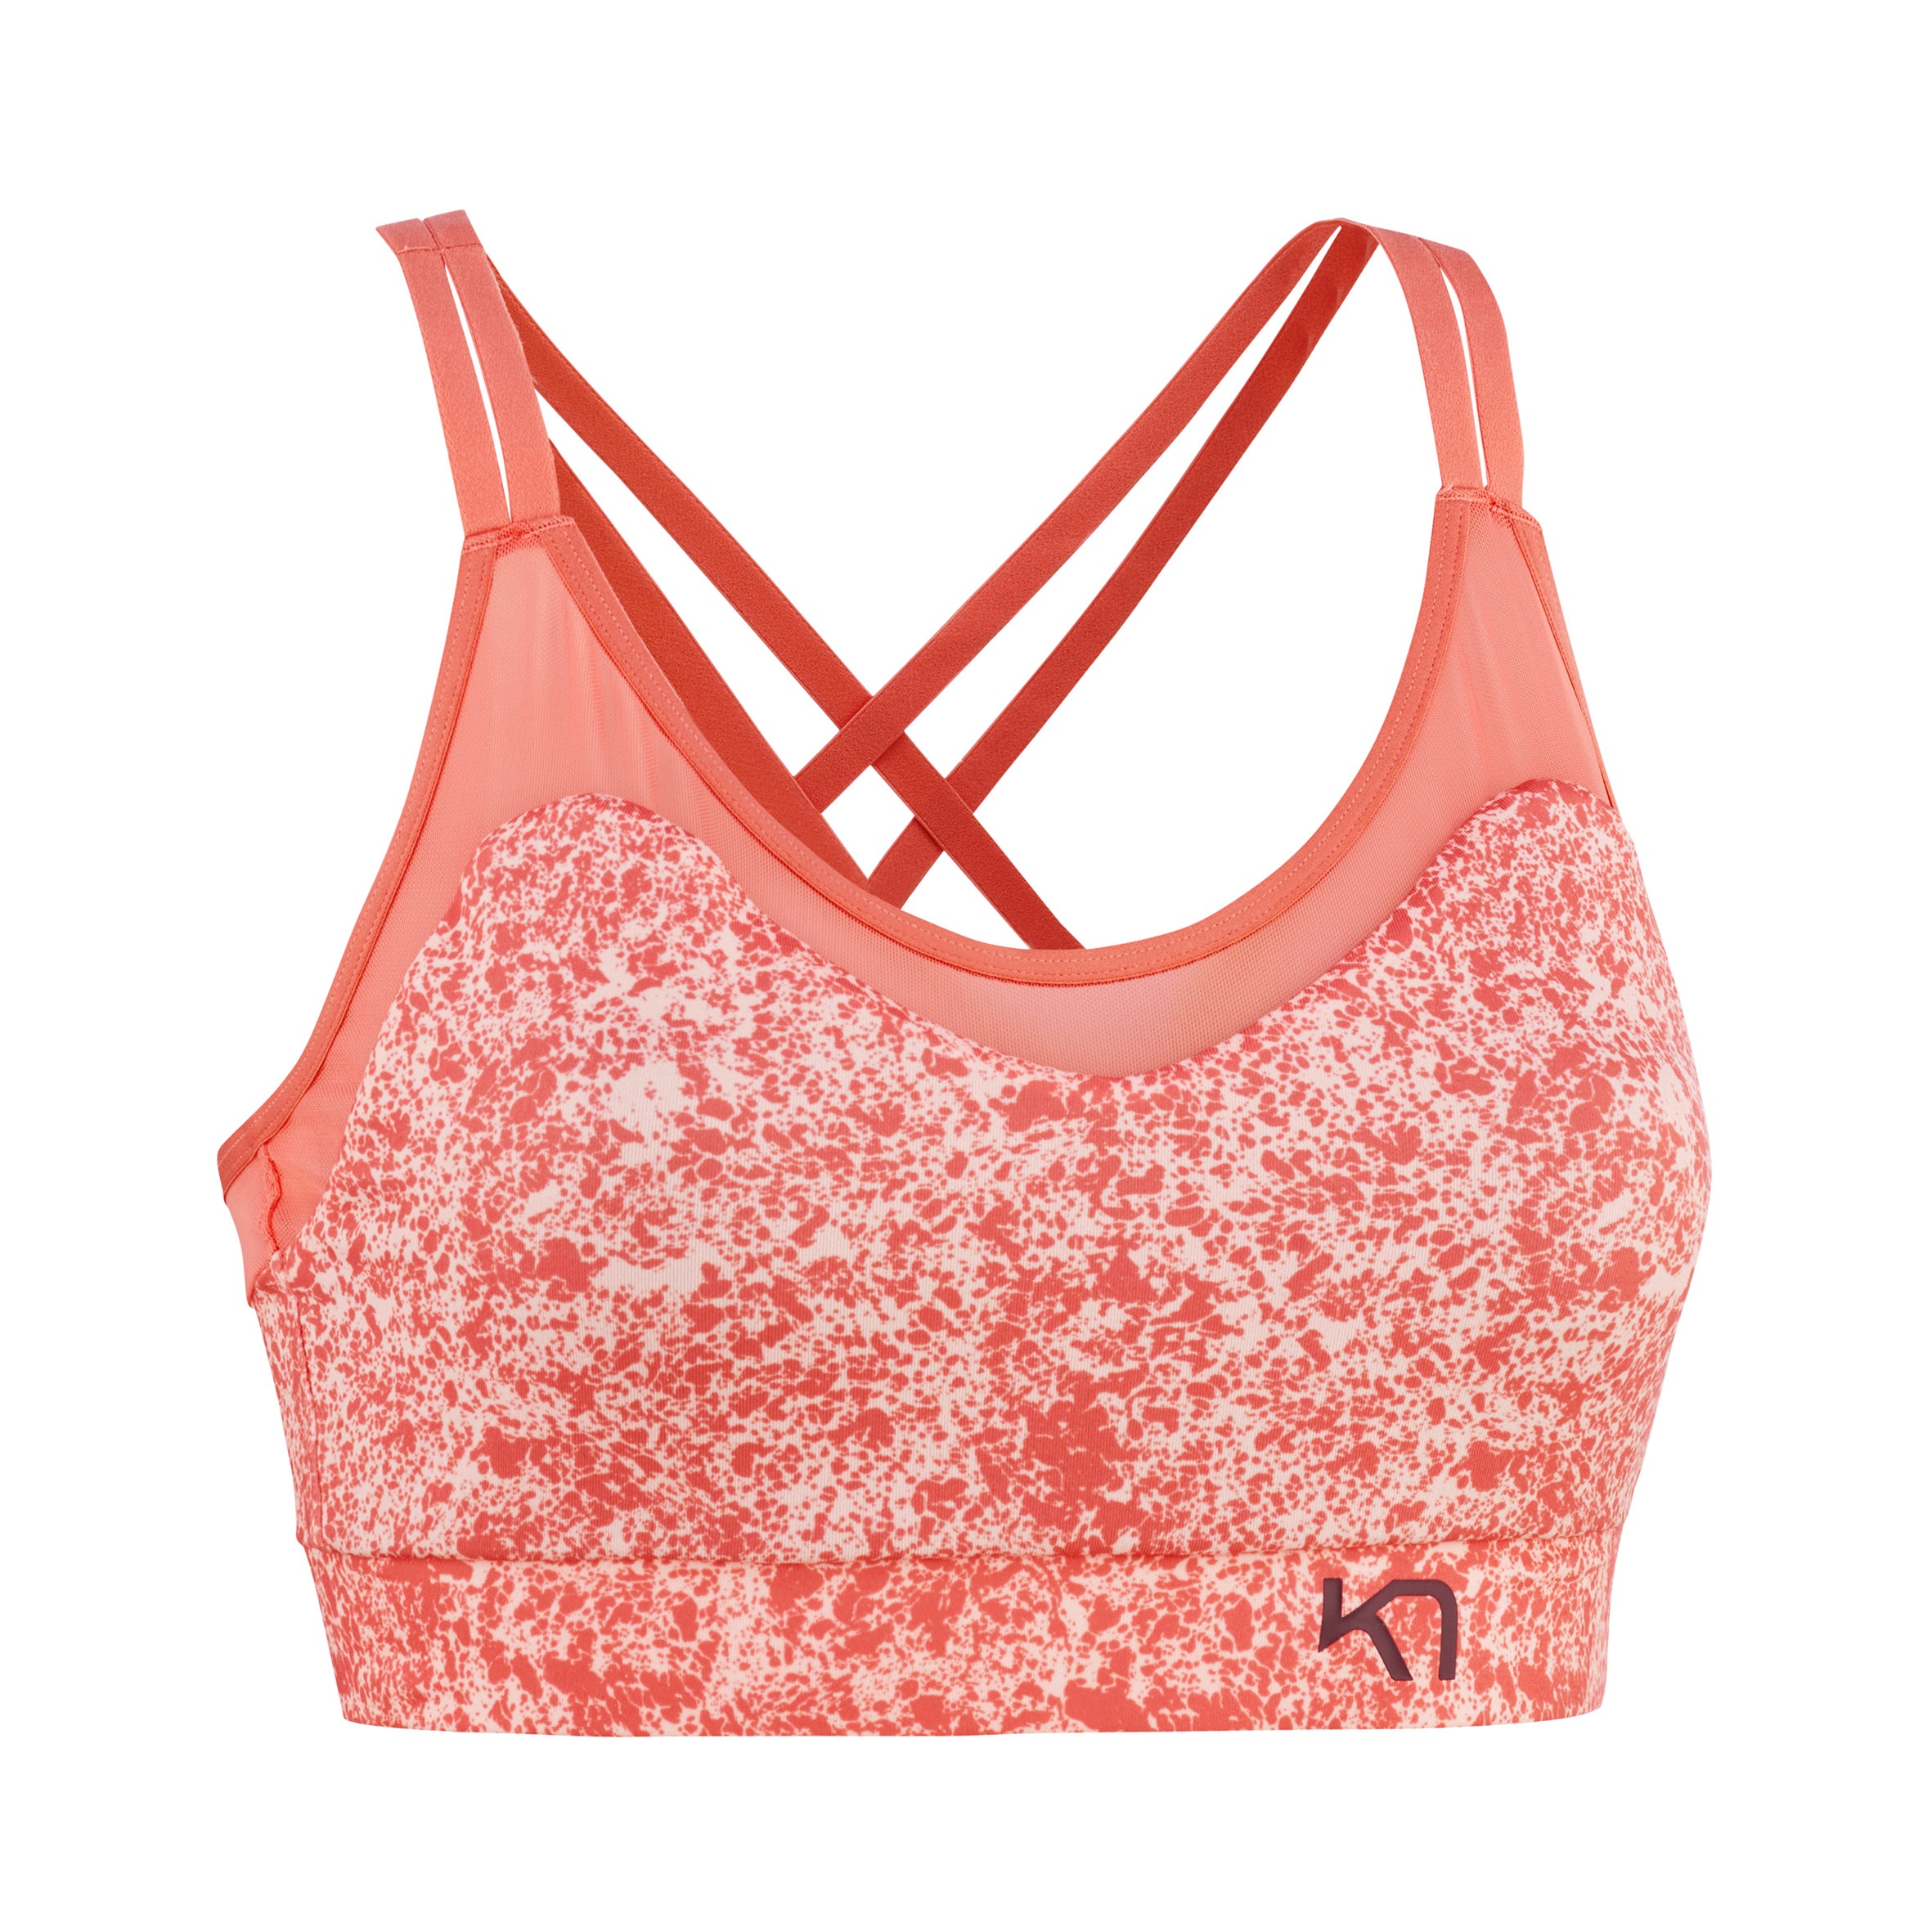 The Best Bras for Backpacking